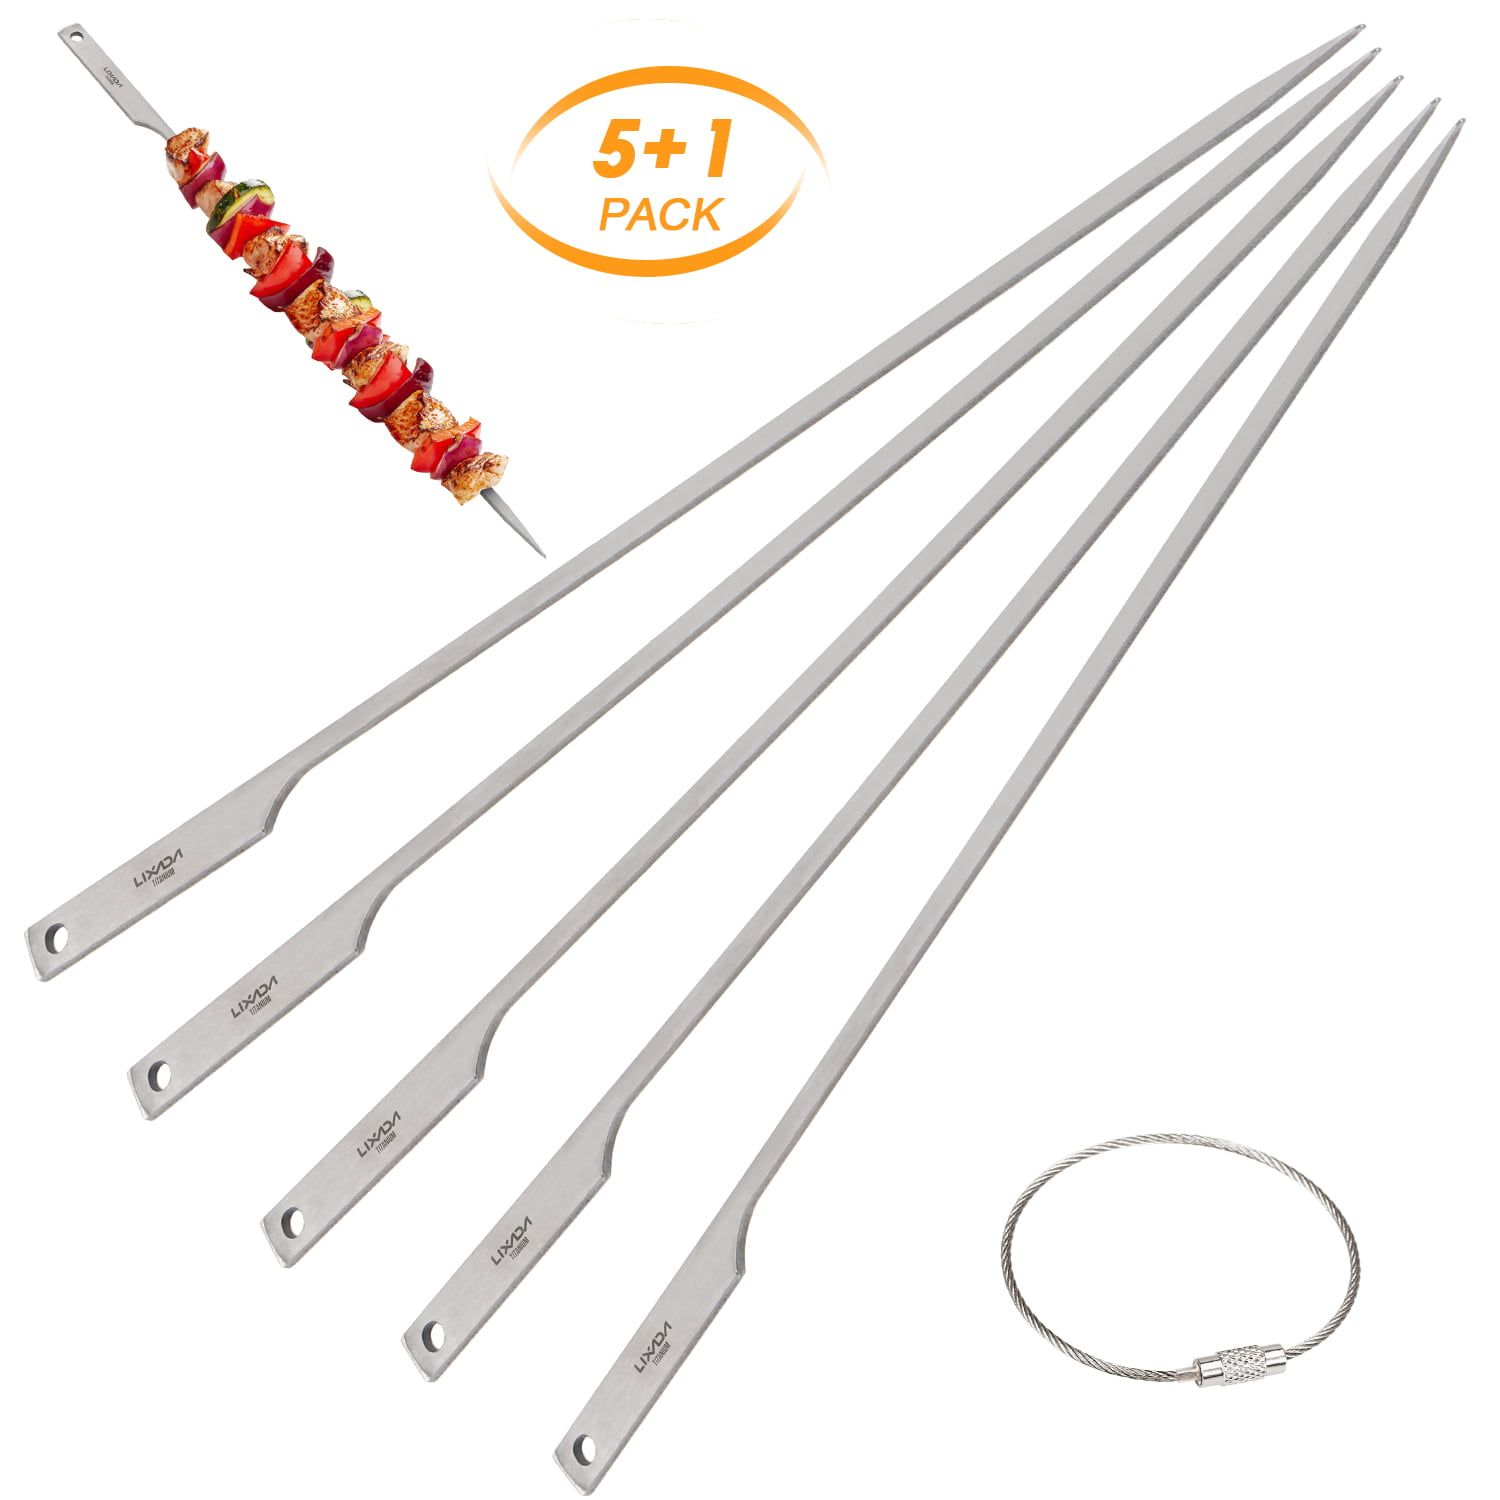 Lixada 5pcs 10 Inch Flat Barbecue Skewers Backyard Picnic BBQ Grilling Kabob Skewers BBQ Sticks with Wire Ring - image 1 of 7